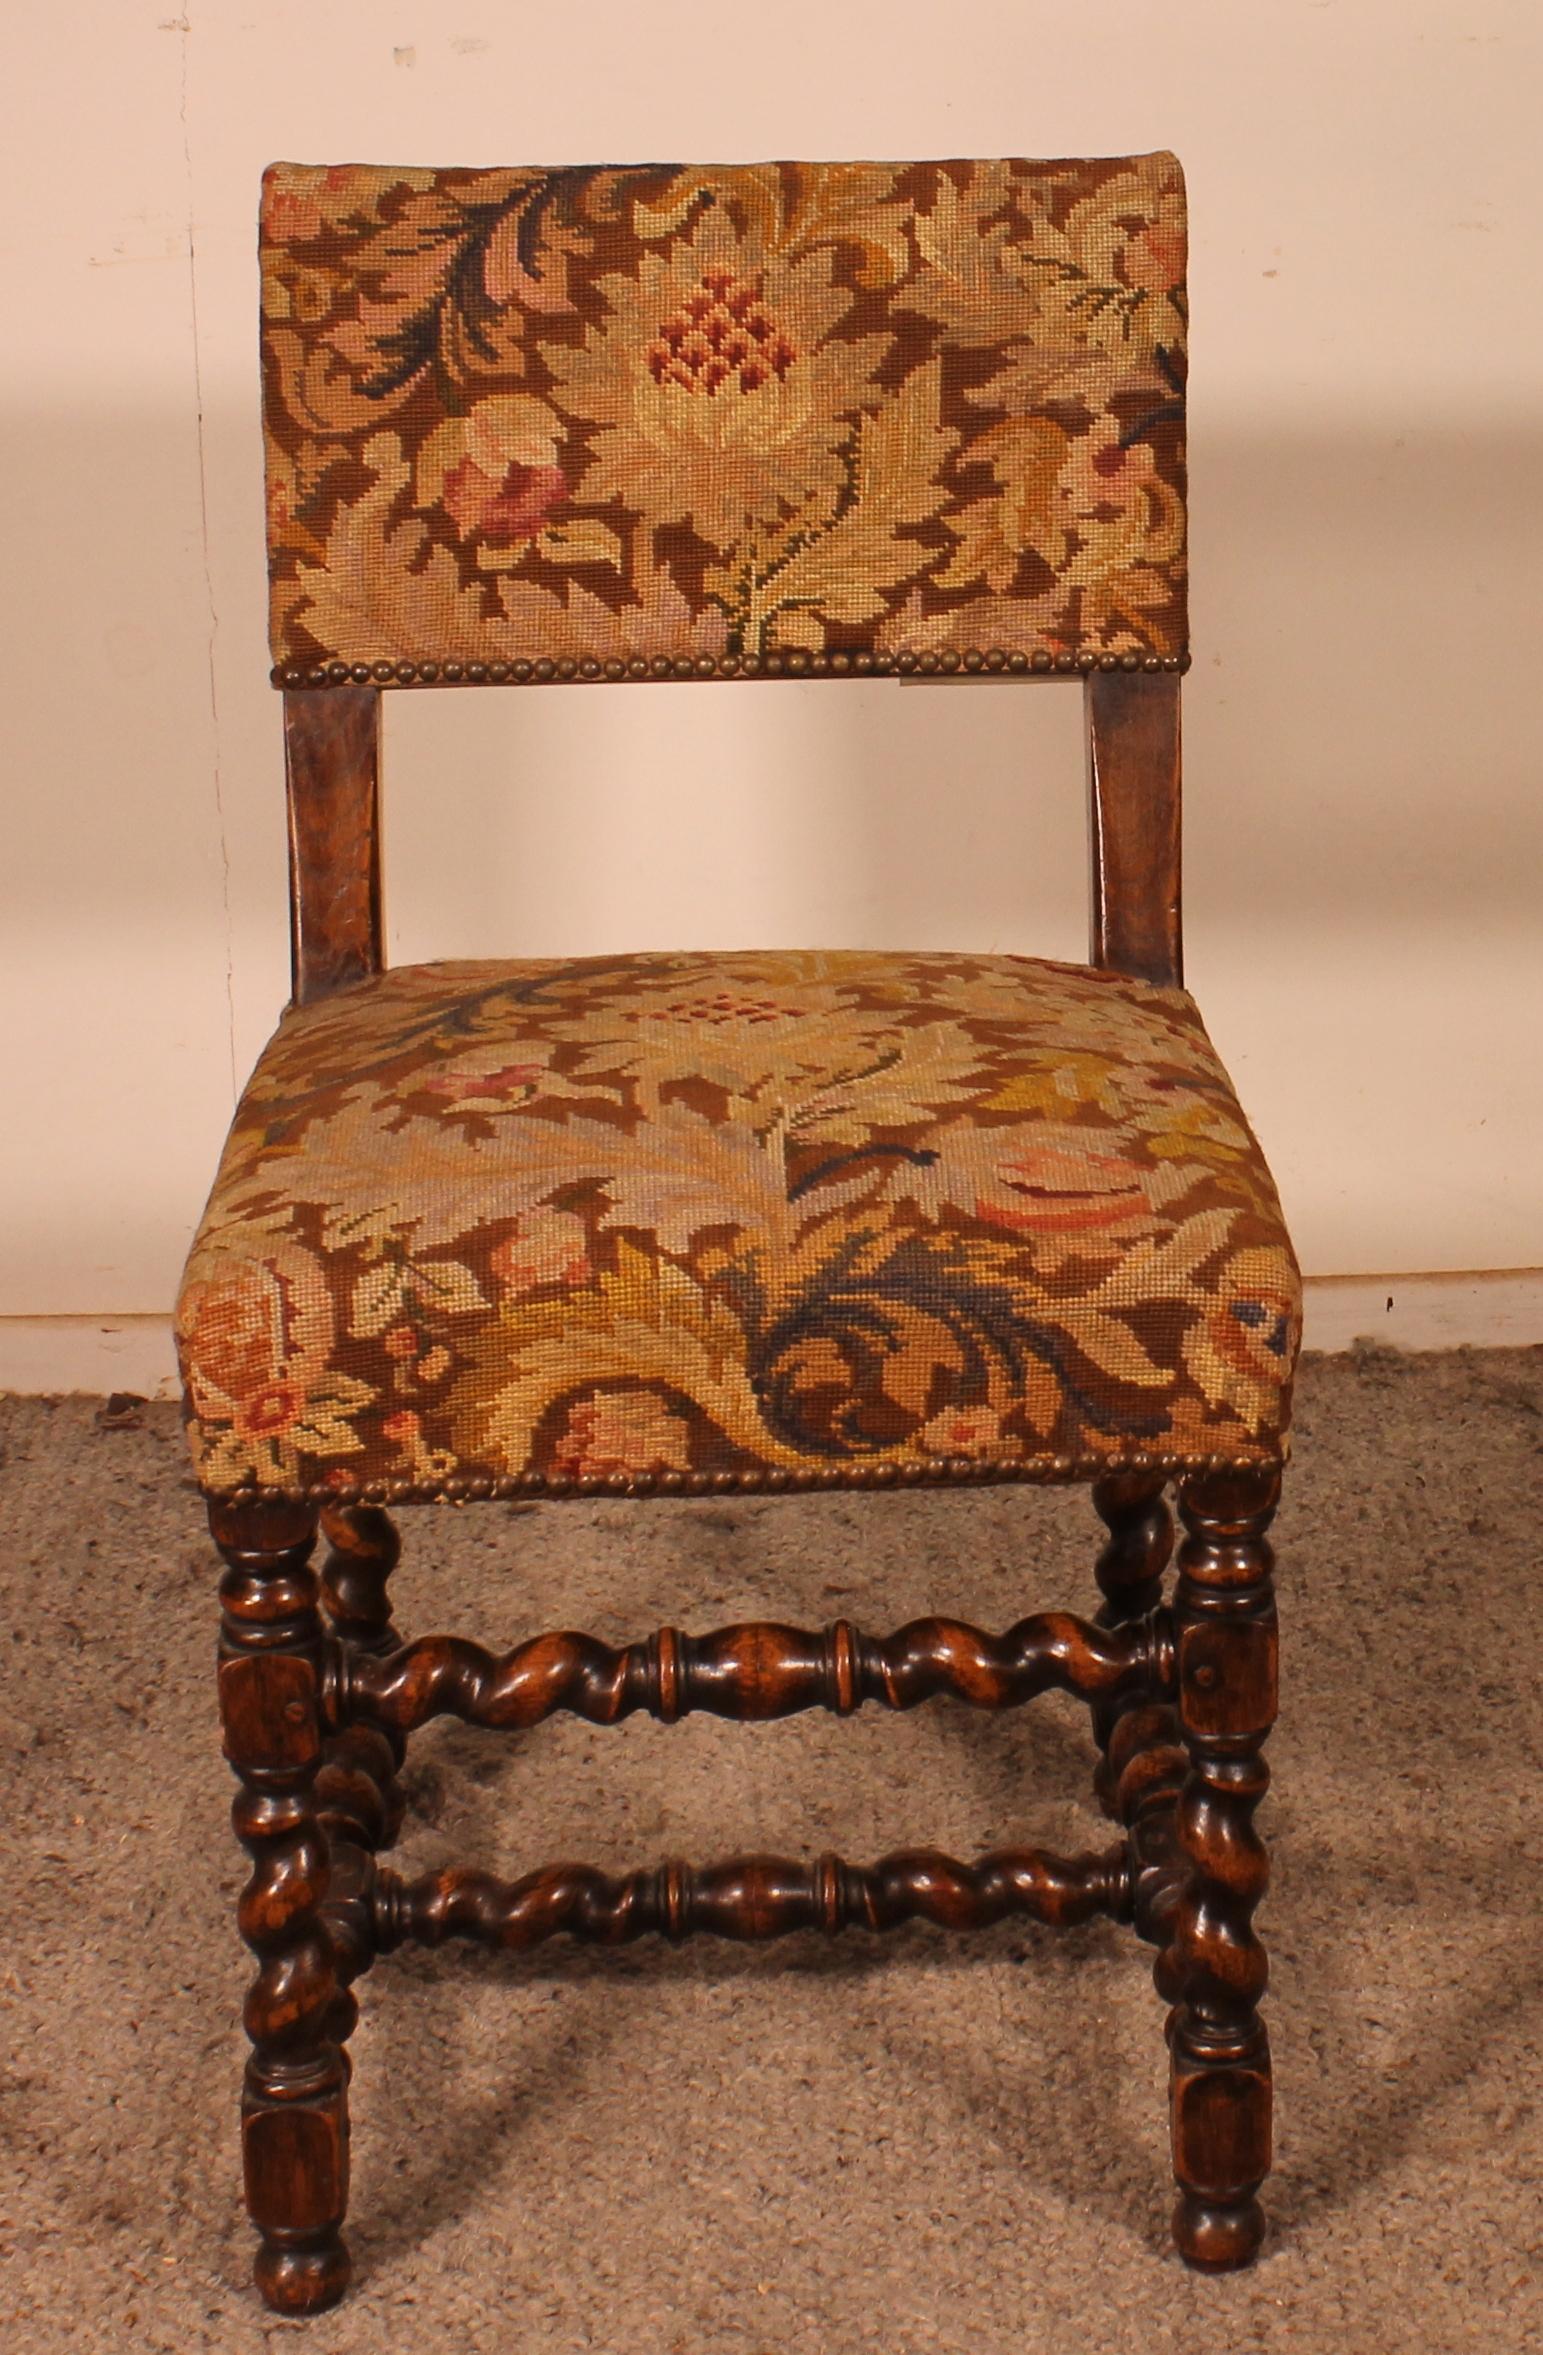 A fine pair of Louis XIII chairs in oak from the 17th century

Very beautiful turned base The base is connected by an H-shaped spacer and a spacer on the front

The chairs are covered with a very beautiful tapistry which is in superb condition